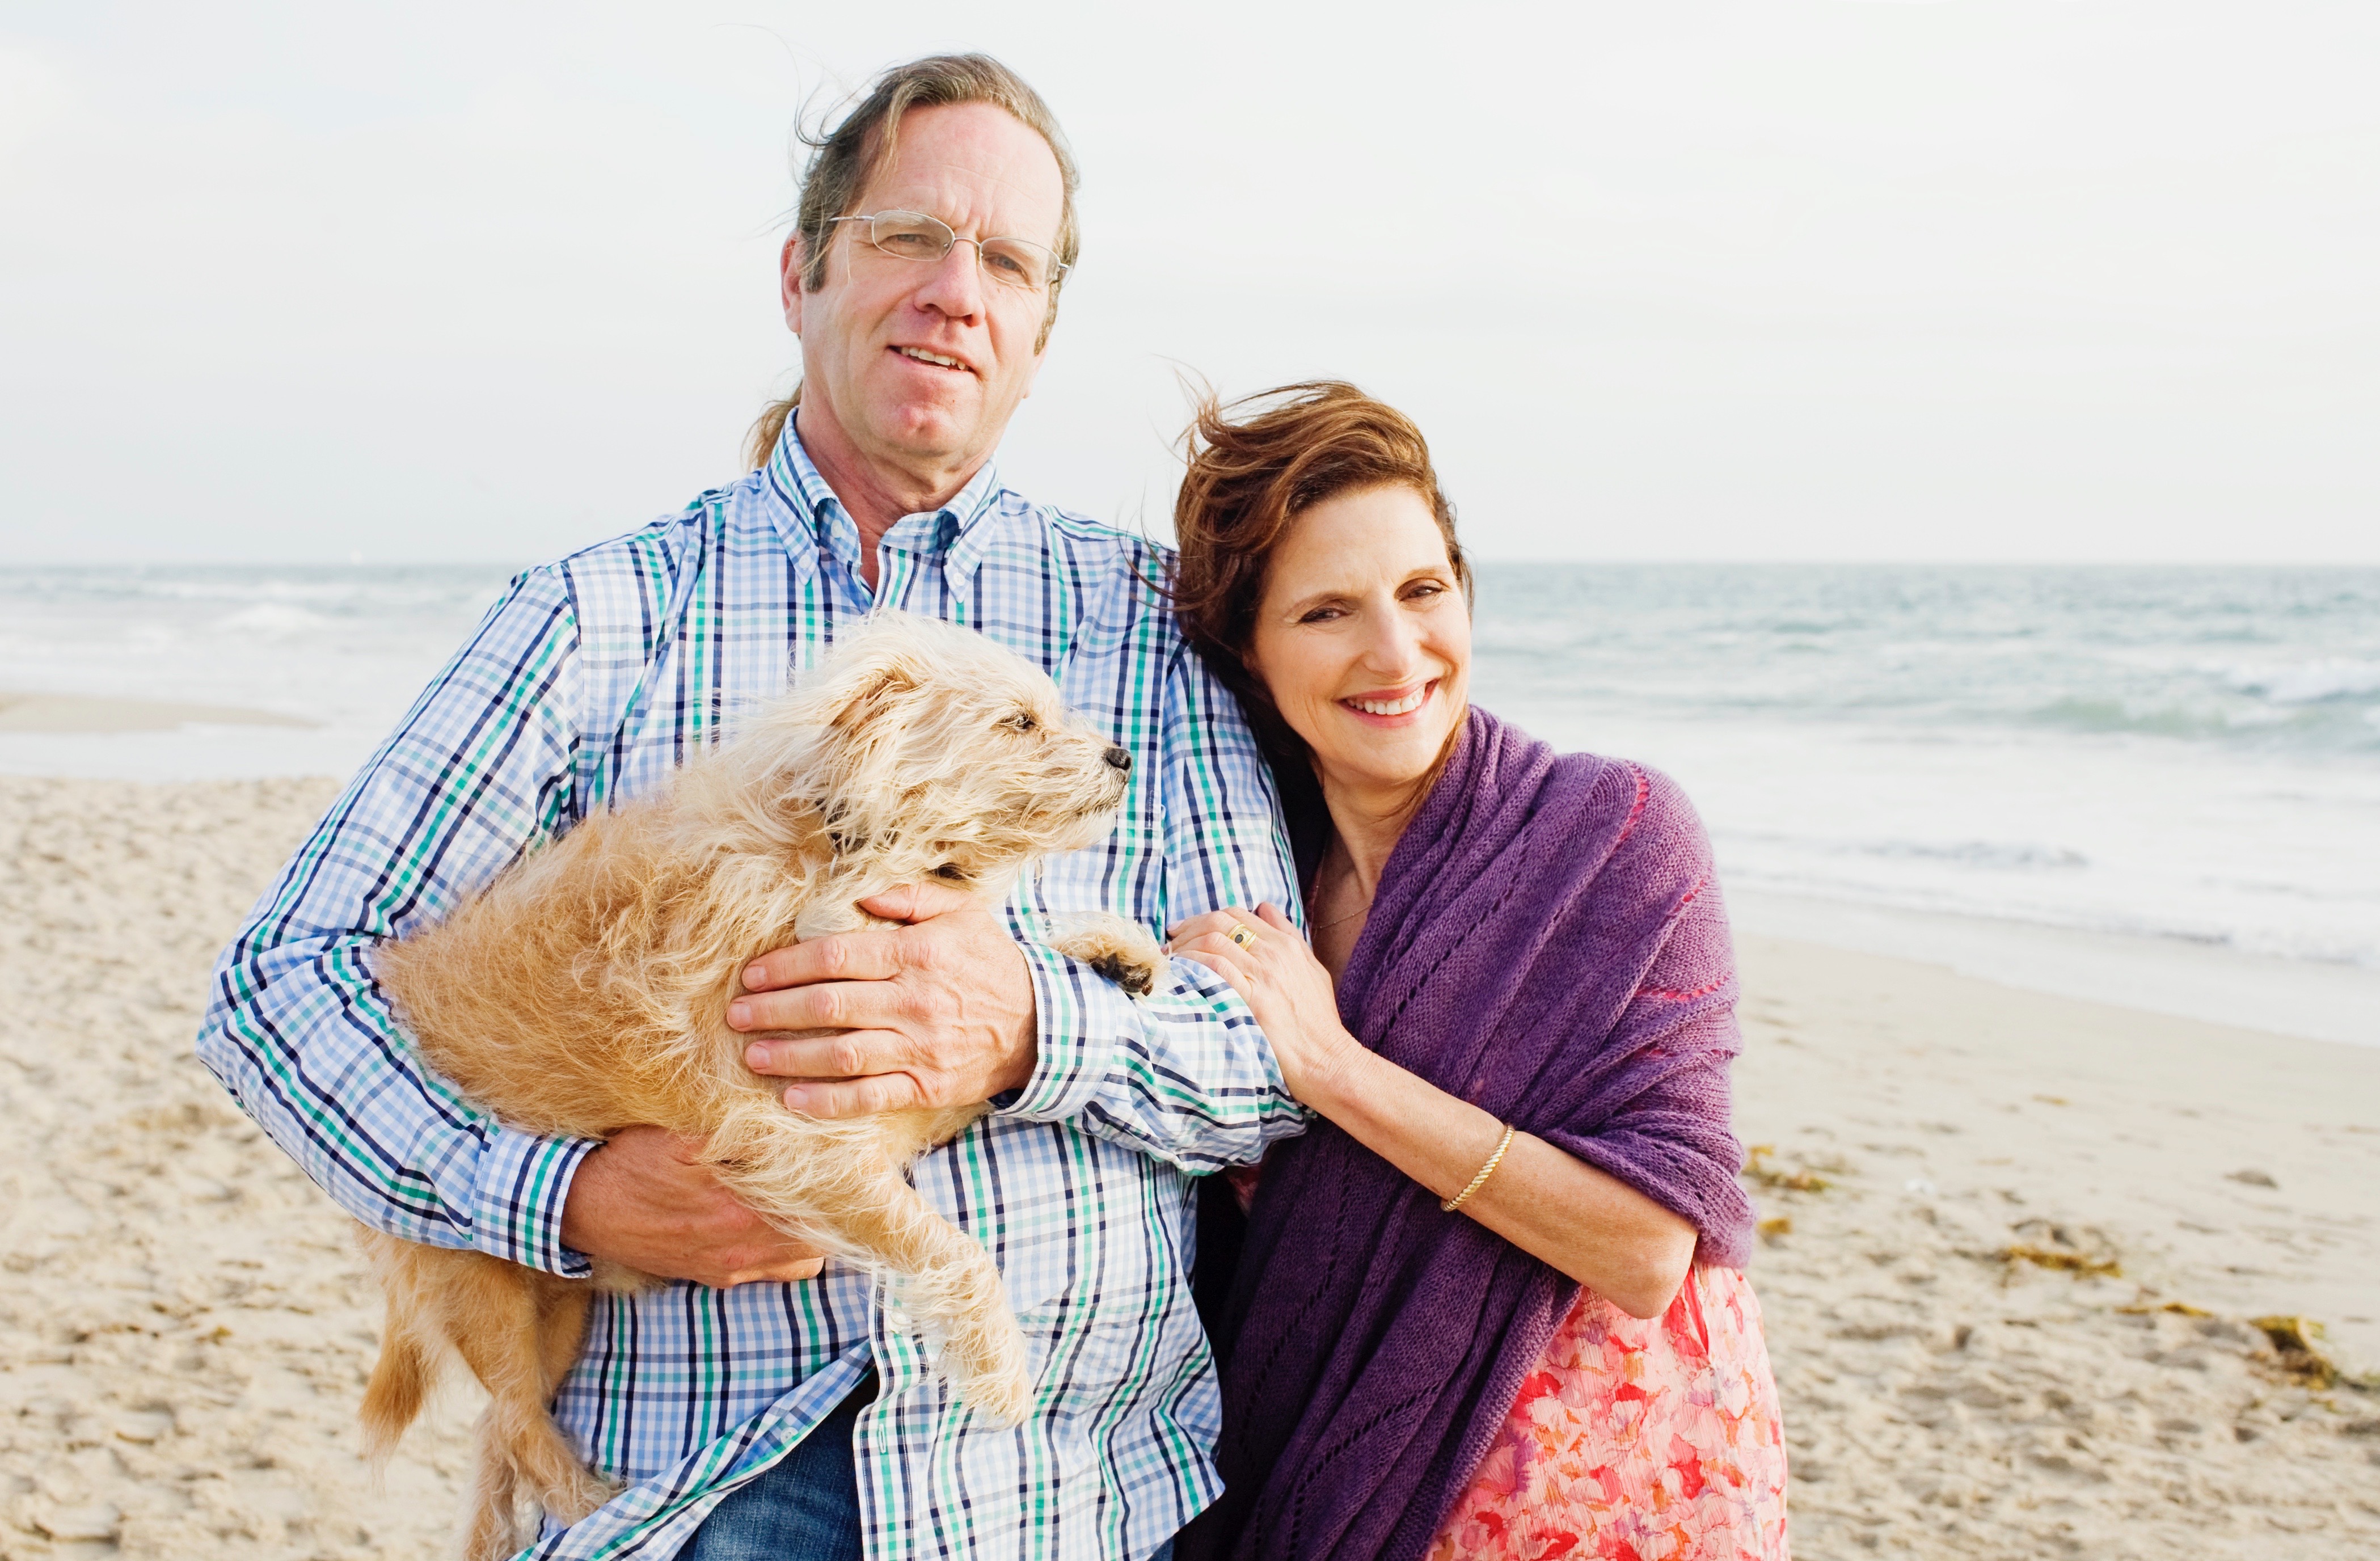 Elaine and Stephen with their dog Puck on the beach in Santa Monica.